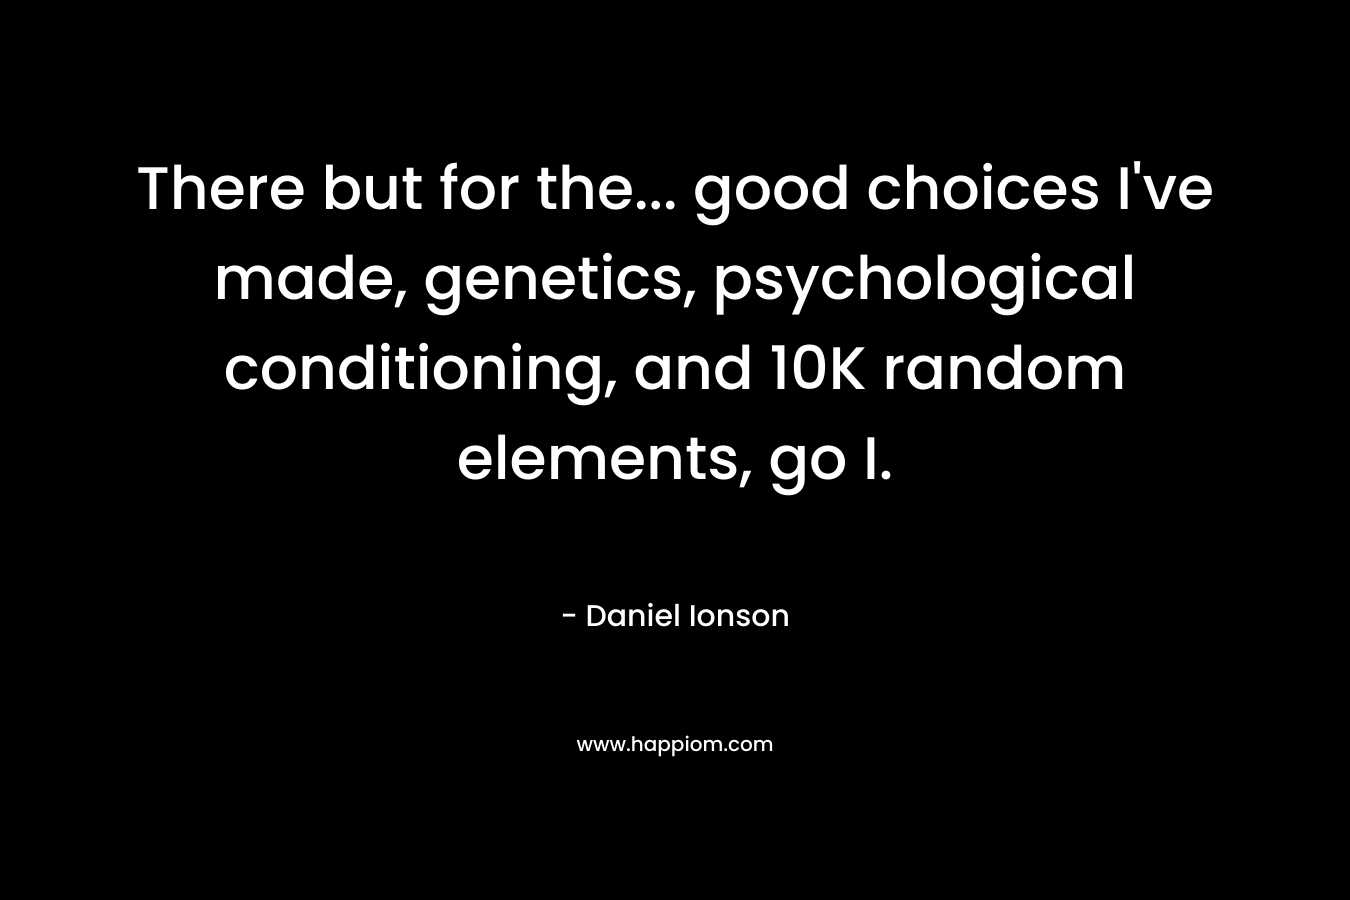 There but for the… good choices I’ve made, genetics, psychological conditioning, and 10K random elements, go I. – Daniel Ionson